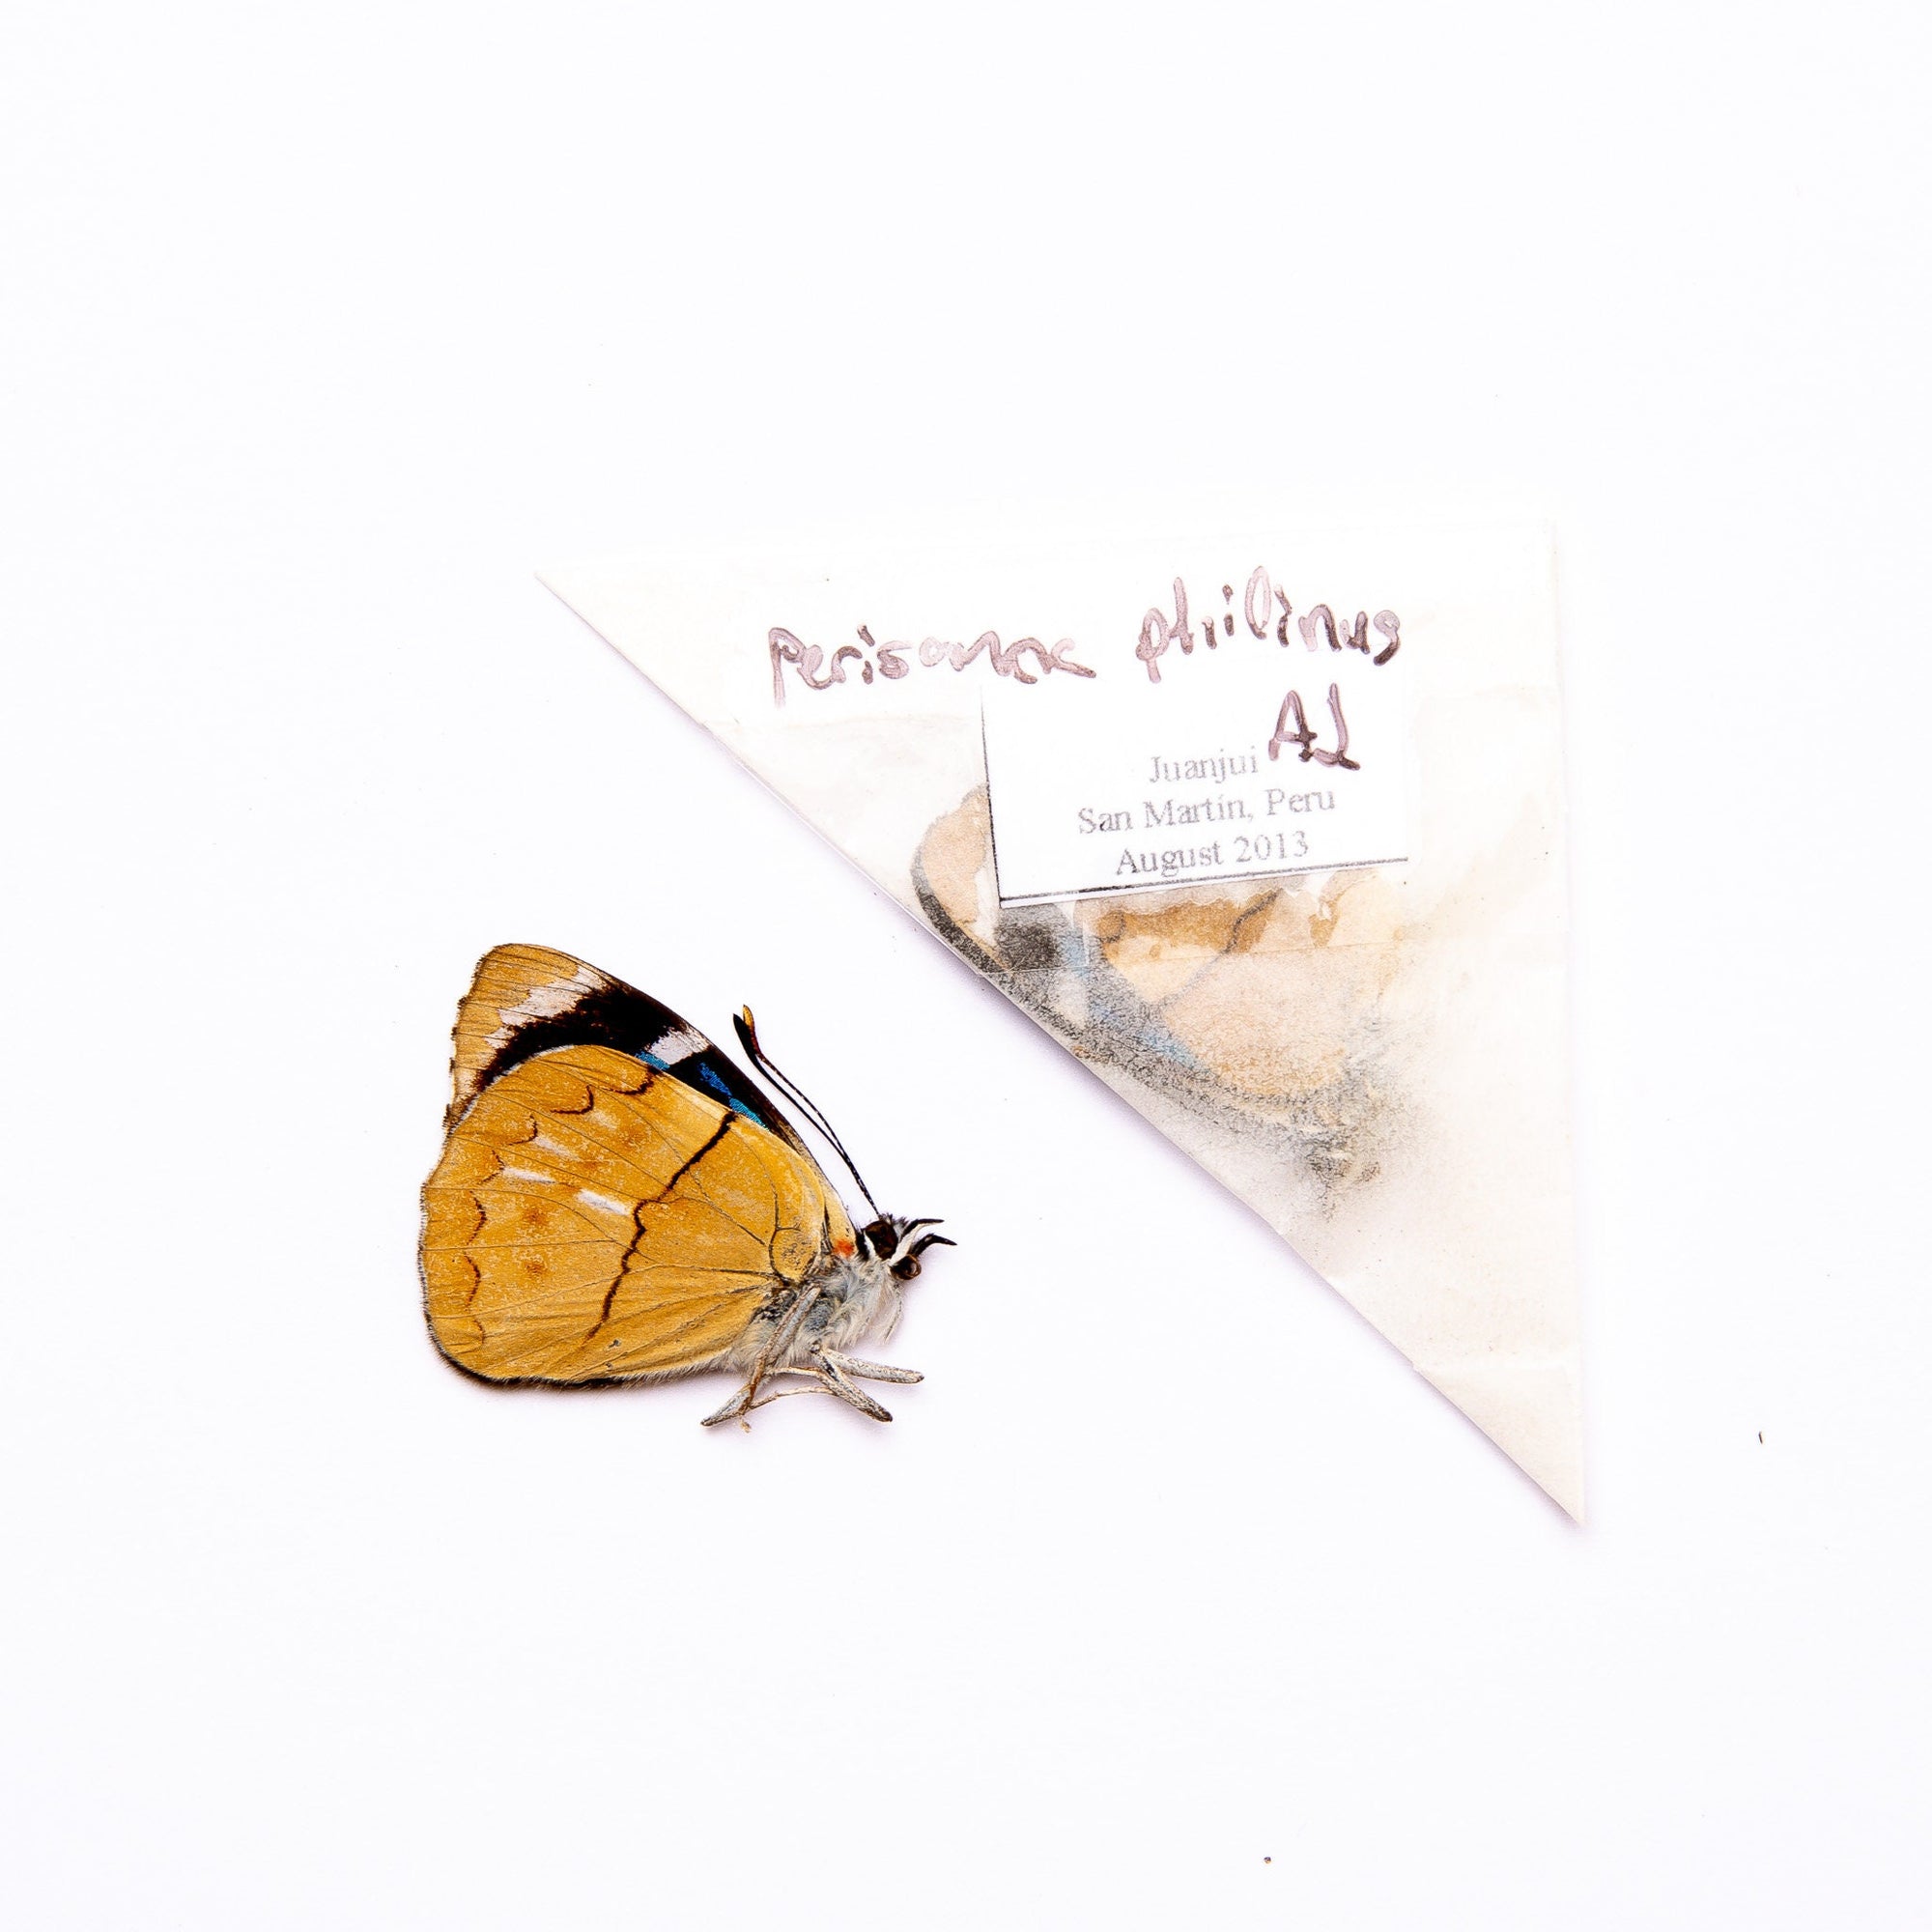 TWO (2) Perisama philinus | A1 Real Dry-Preserved Butterflies | Unmounted Entomology Taxidermy Specimens